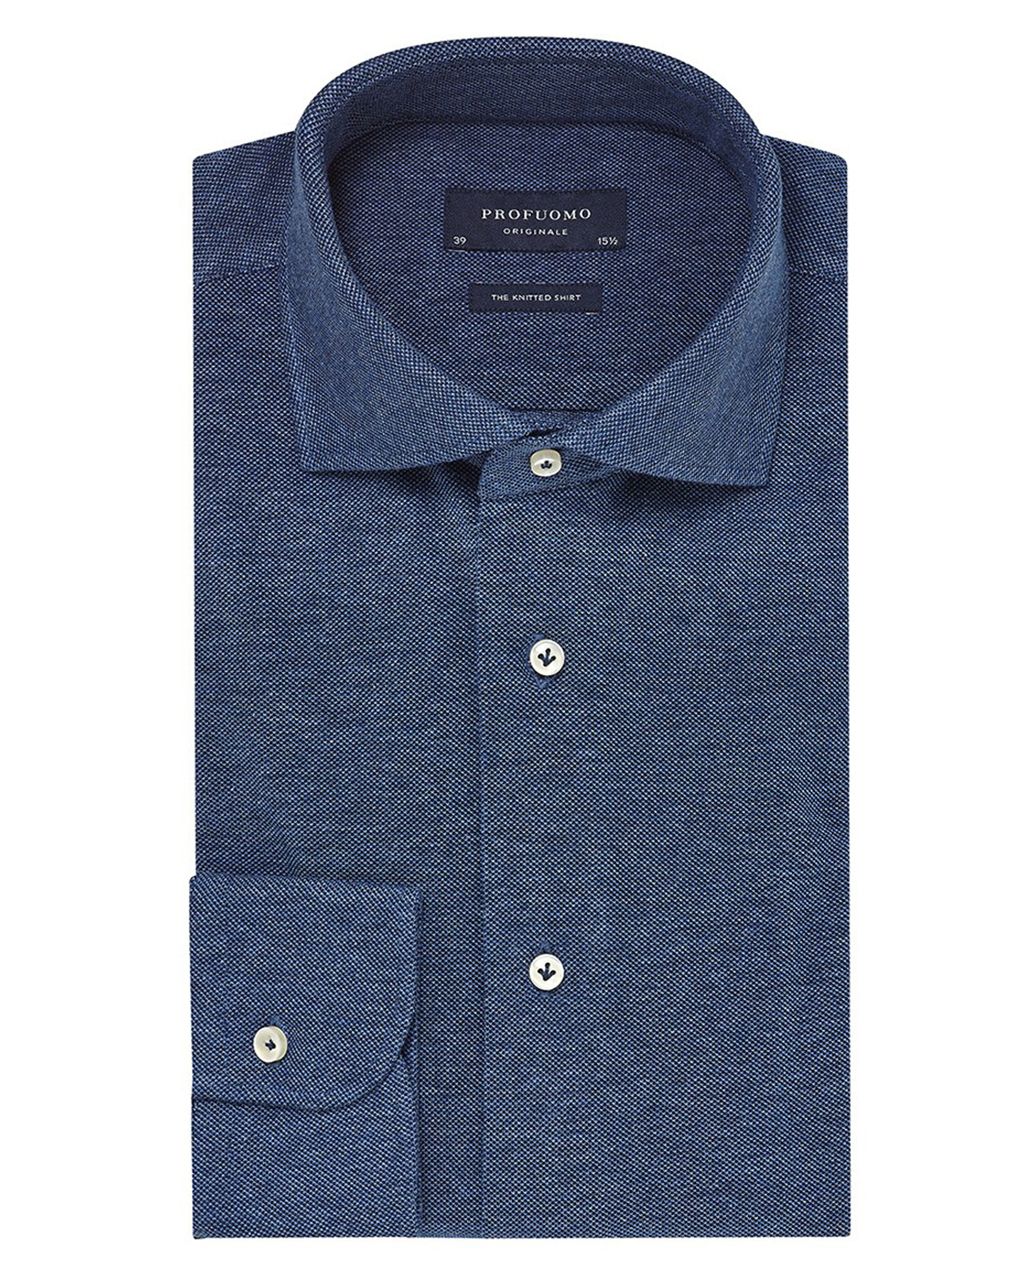 Profuomo Originale Slim fit Knitted Overhemd LM Donker blauw 031997-31-37